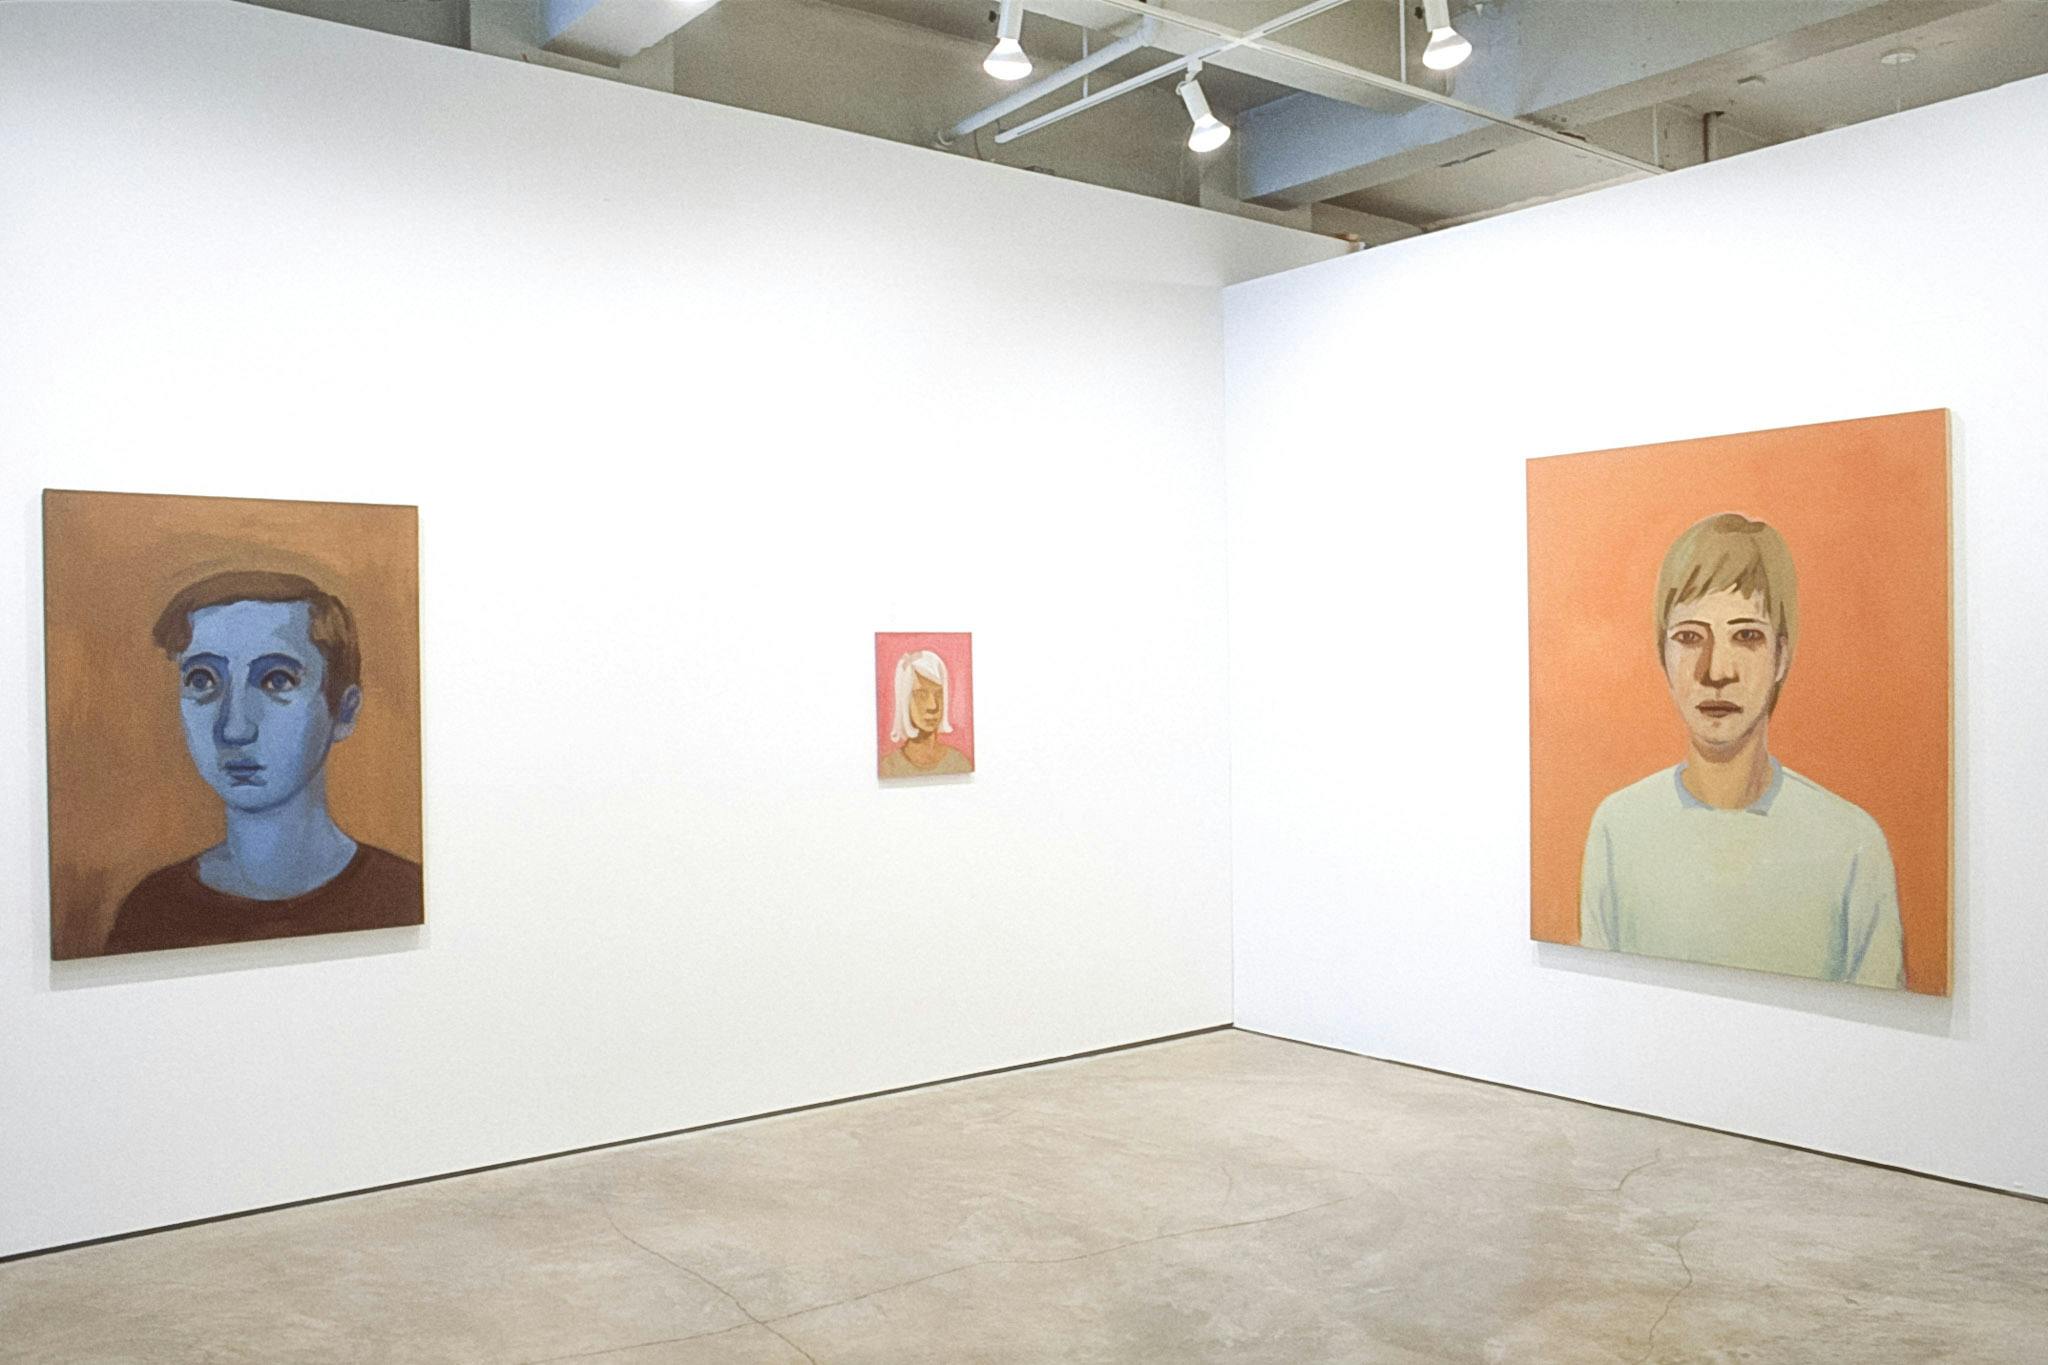 Three portrait paintings are exhibited on the galley walls. The left one is a blue-skinned man, the tiny one in the middle is a woman with grey hair. The one on the right is orange. 